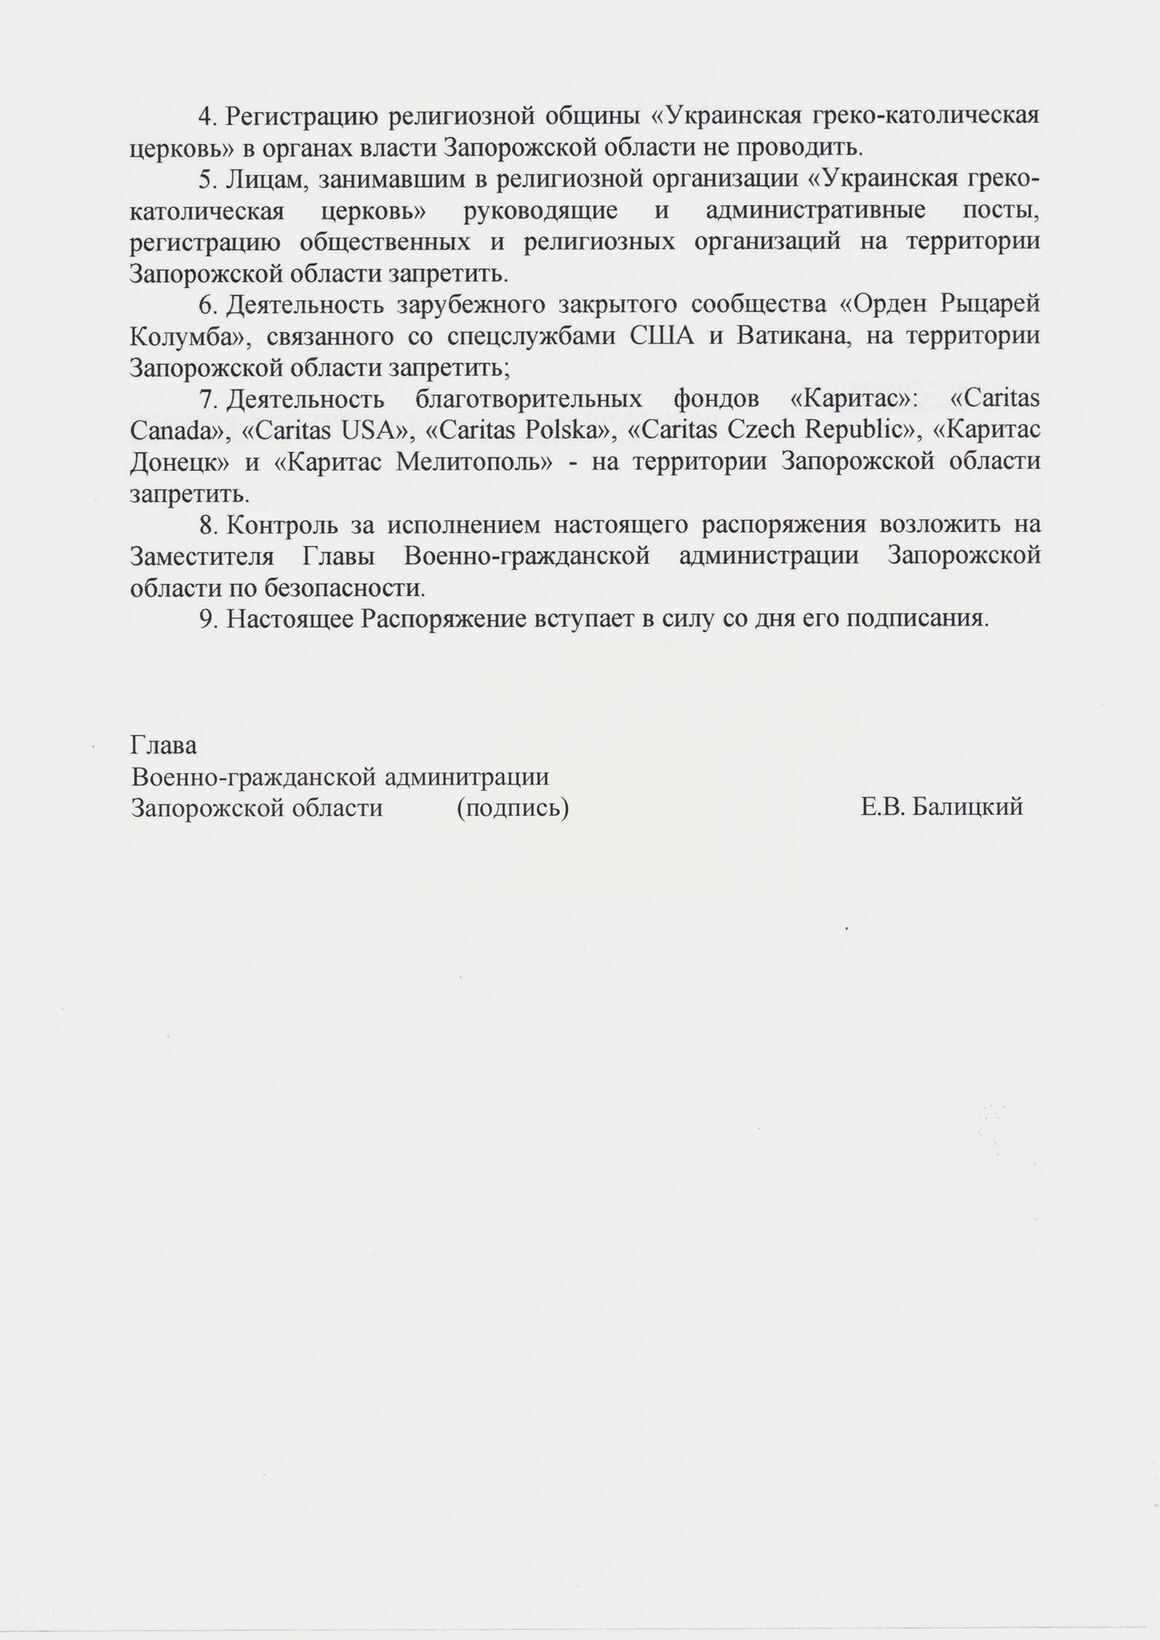 The occupiers banned the activities of the Ukrainian Greek Catholic Church in the captured part of Zaporizhzhia. Document